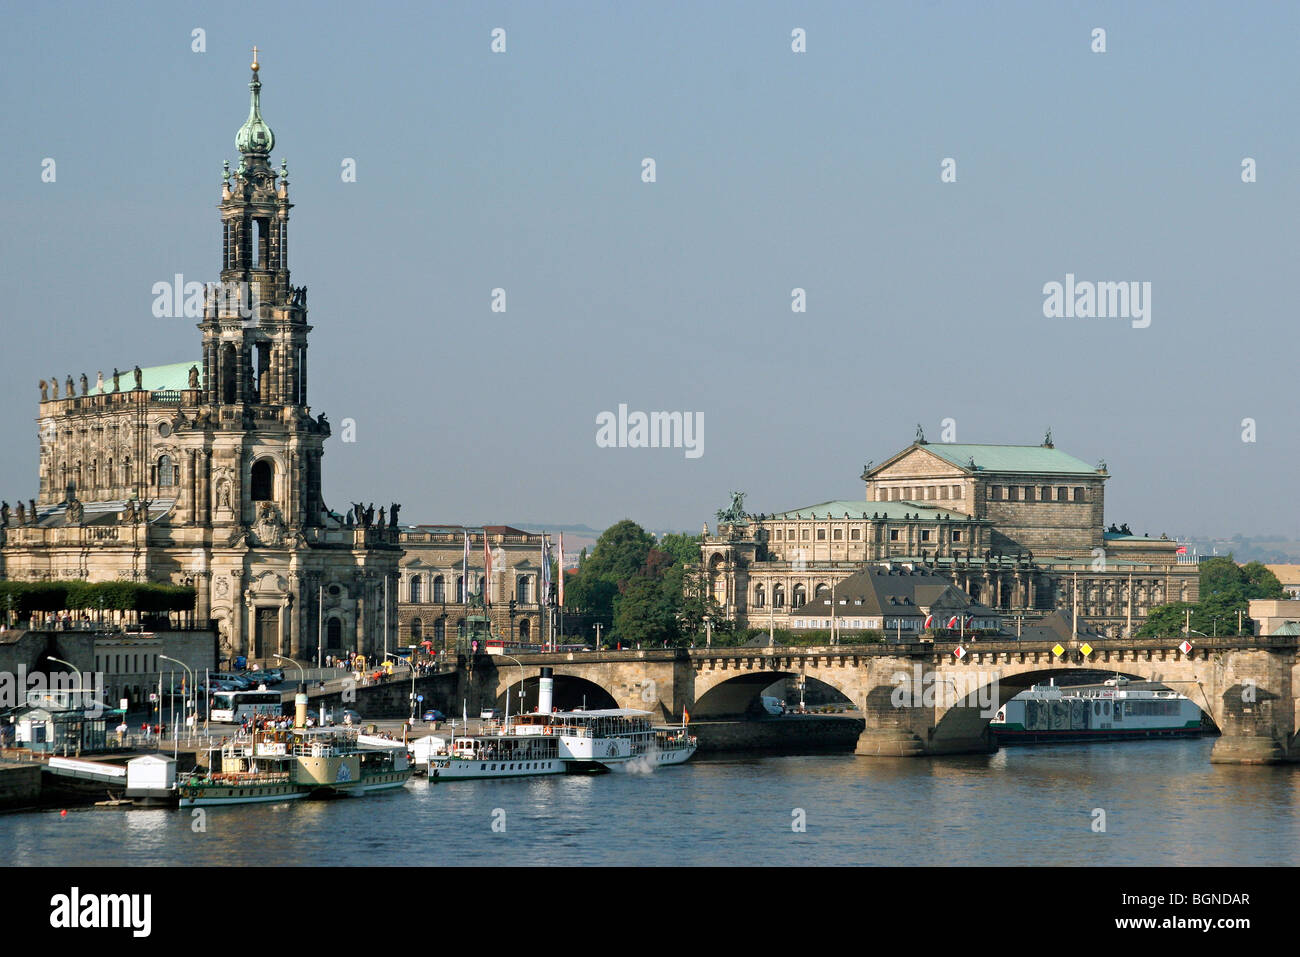 The Katholische Hofkirche , a Roman Catholic Cathedral in the Altstadt in Dresden along the river Elbe, Germany Stock Photo